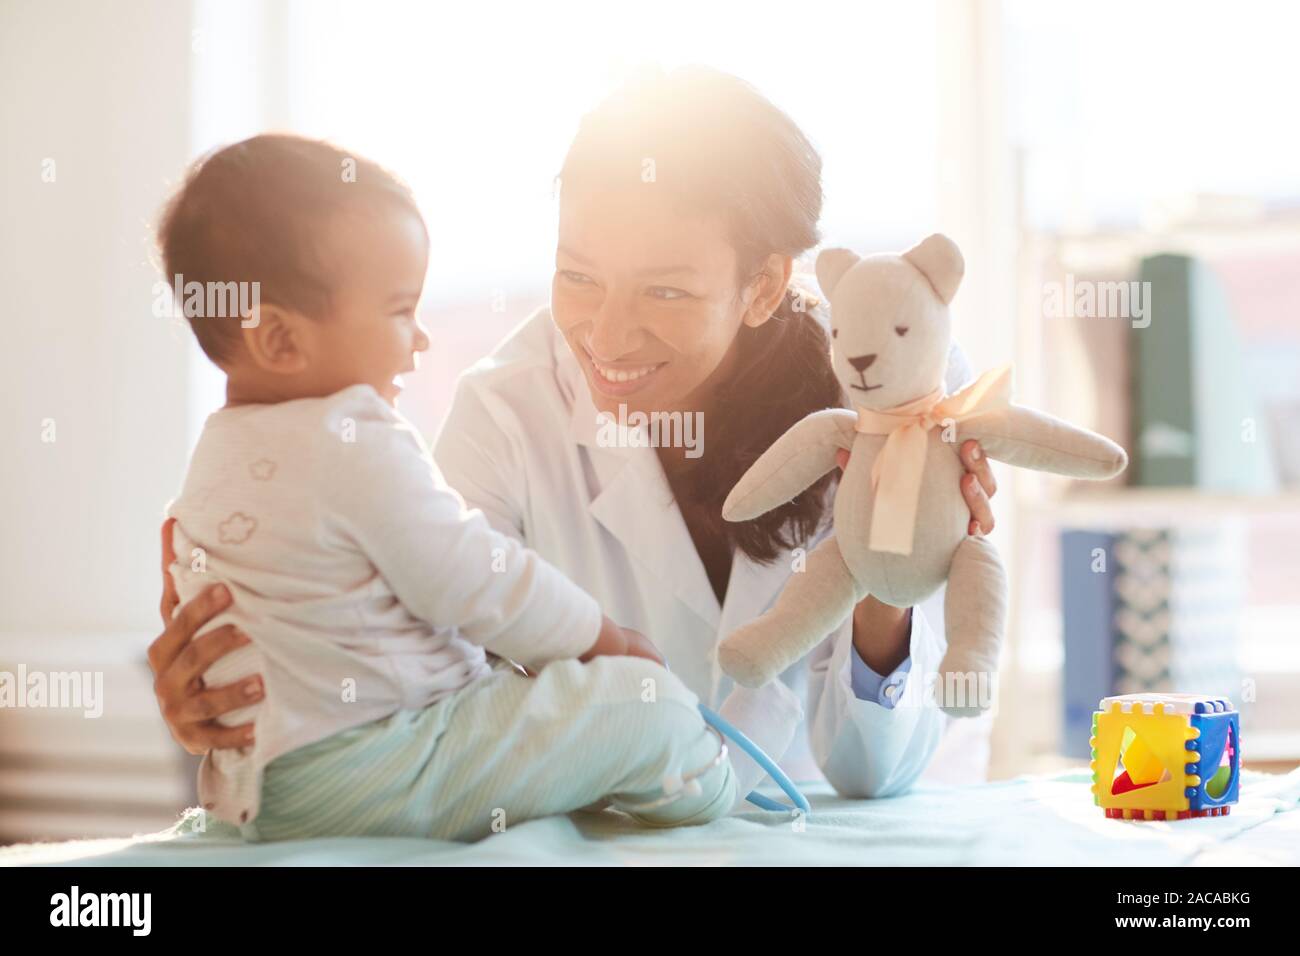 Young female doctor smiling and playing with baby boy during her visit Stock Photo